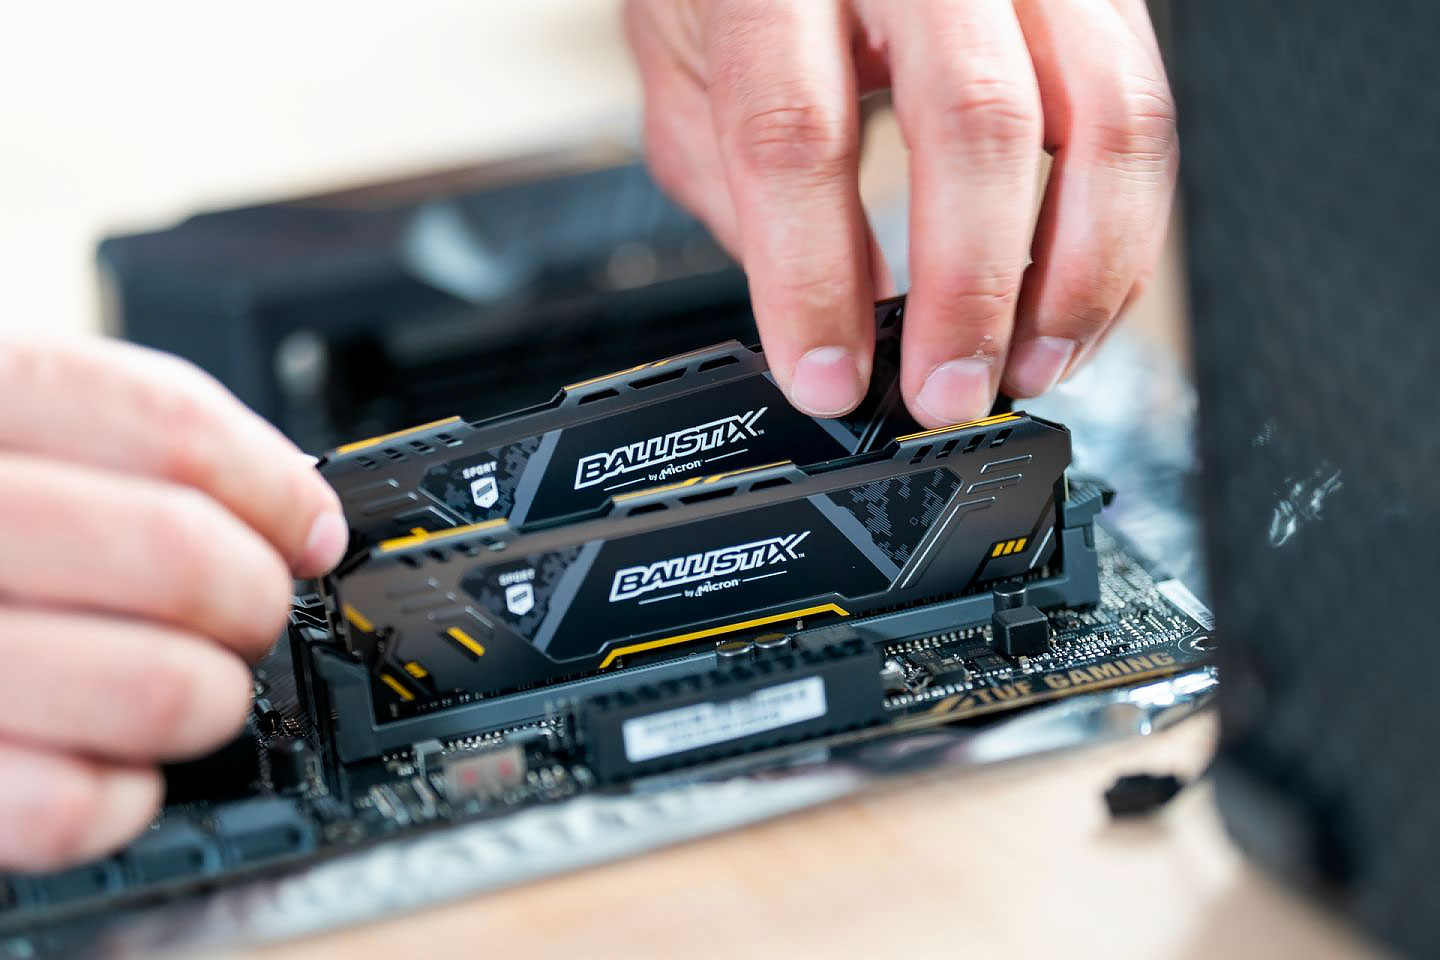 Ballistix memory card being placed on motherboard